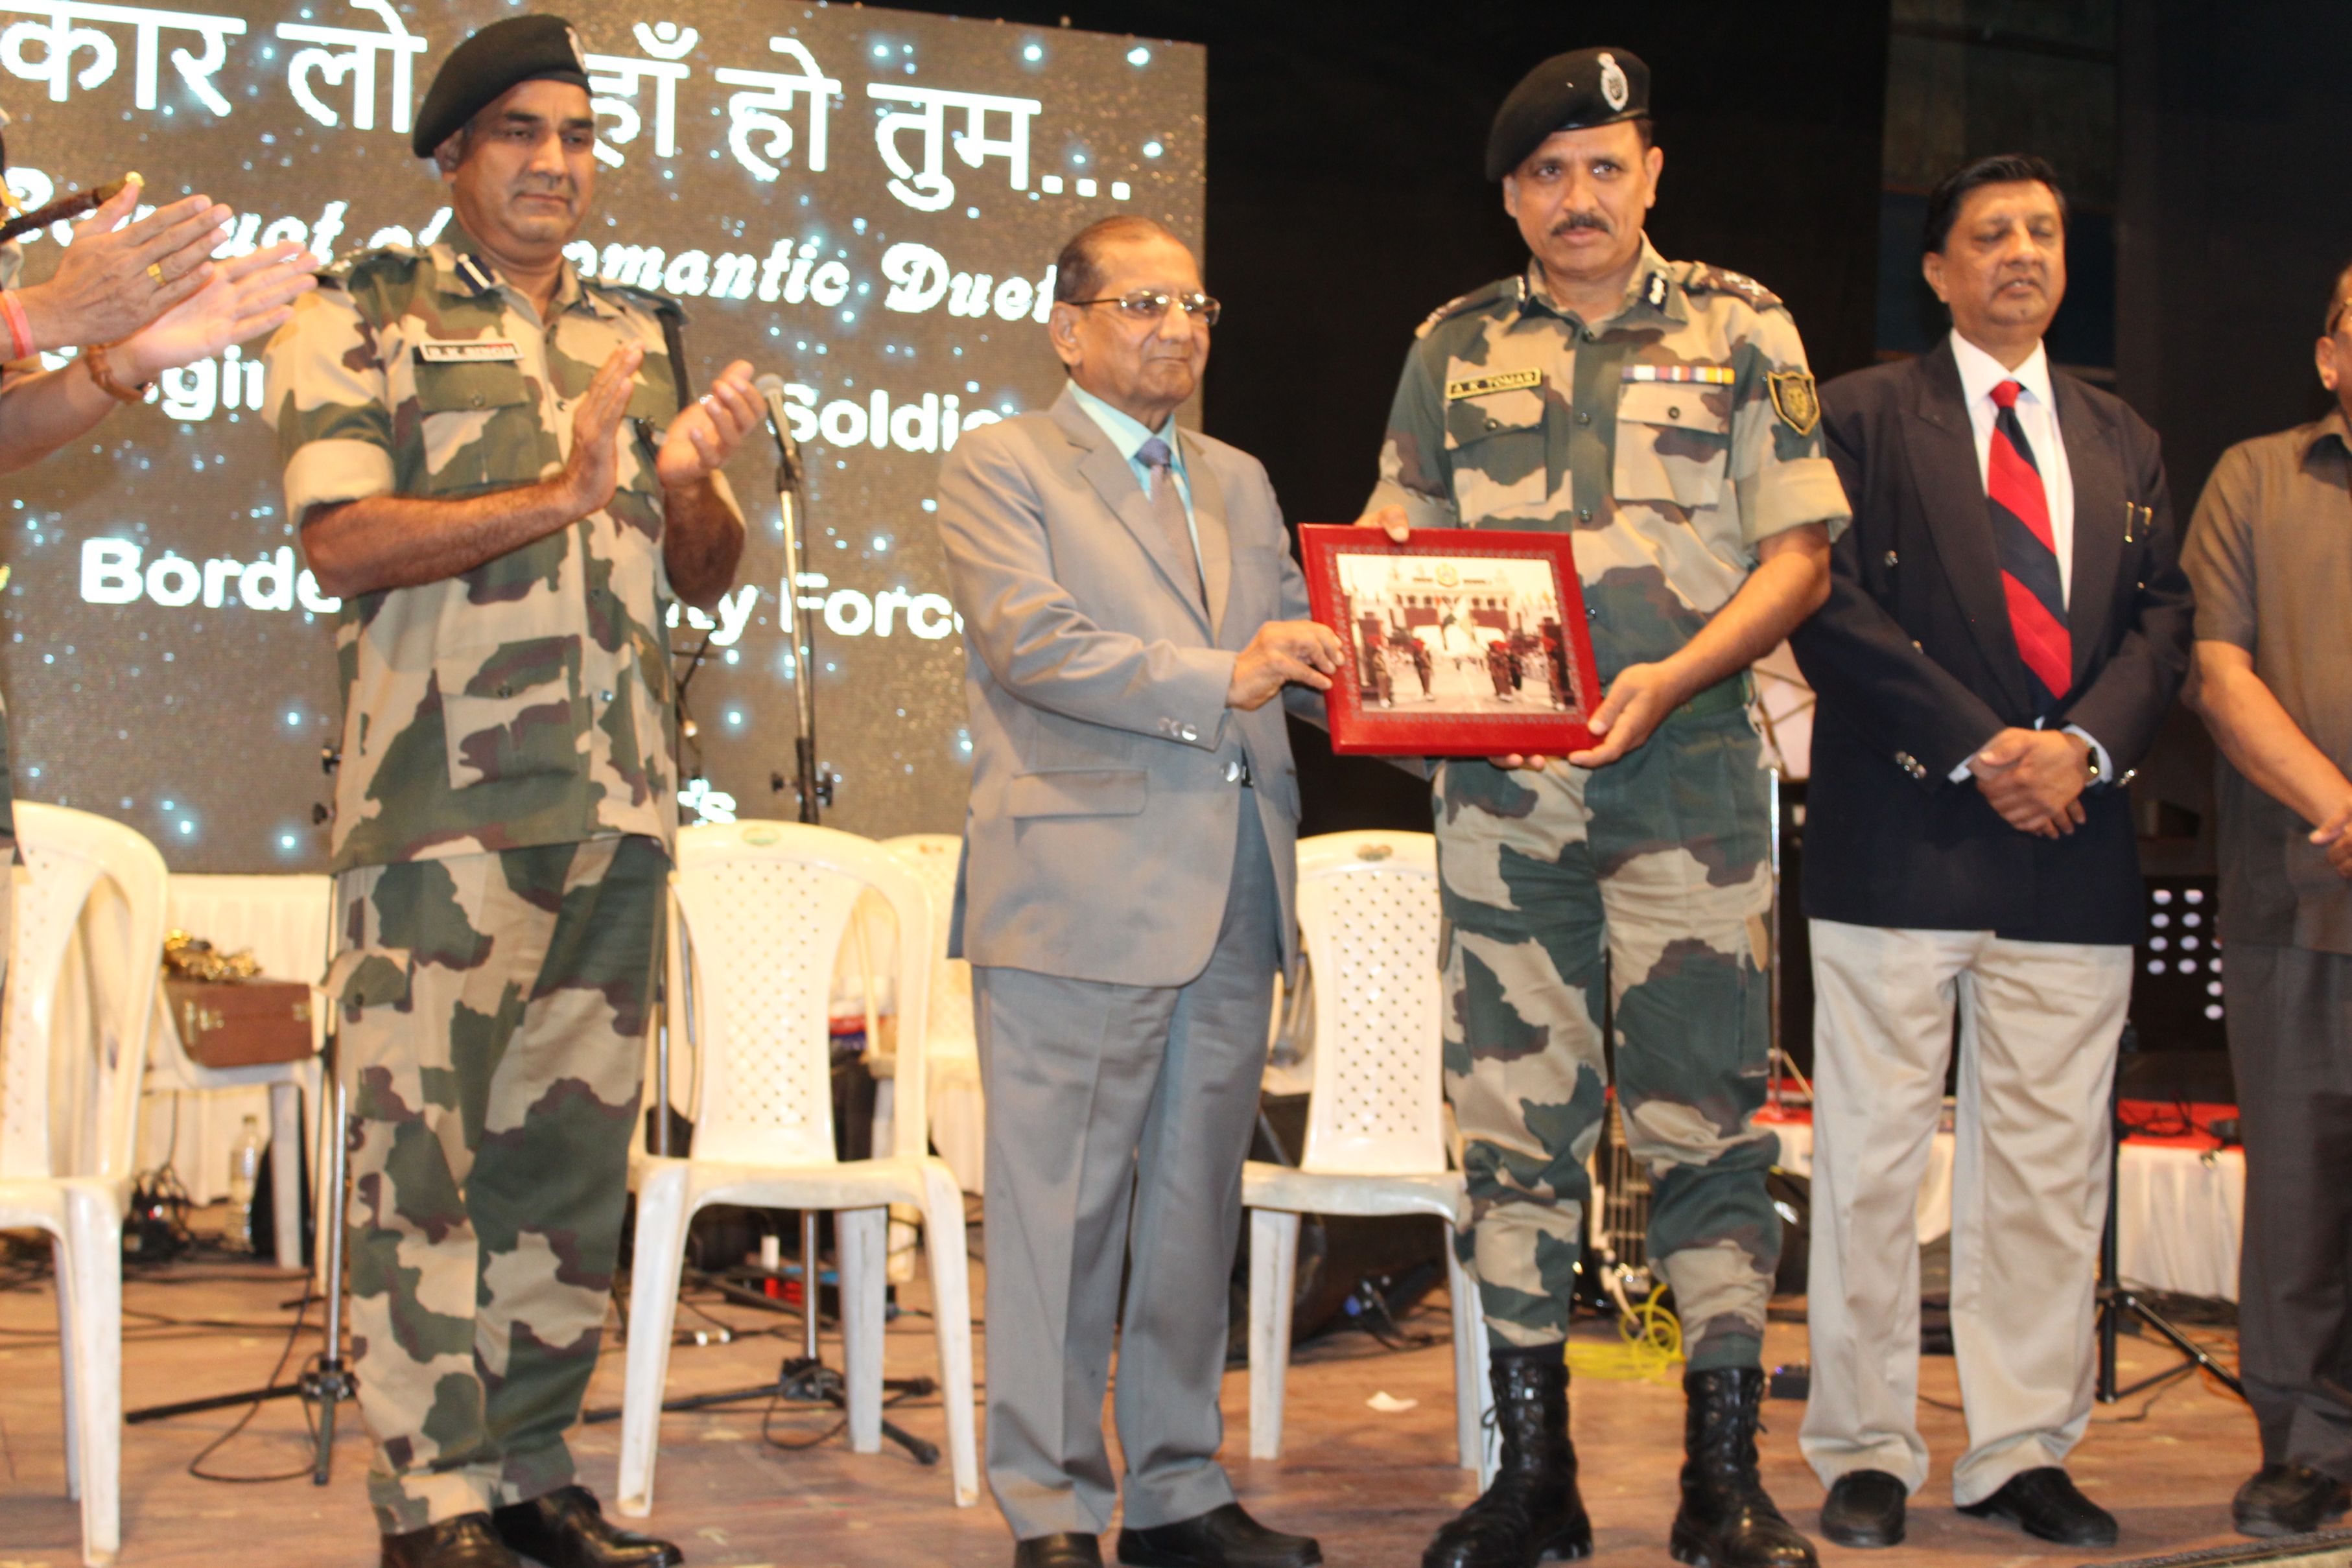 Fund raising music concert for BSF soldiers